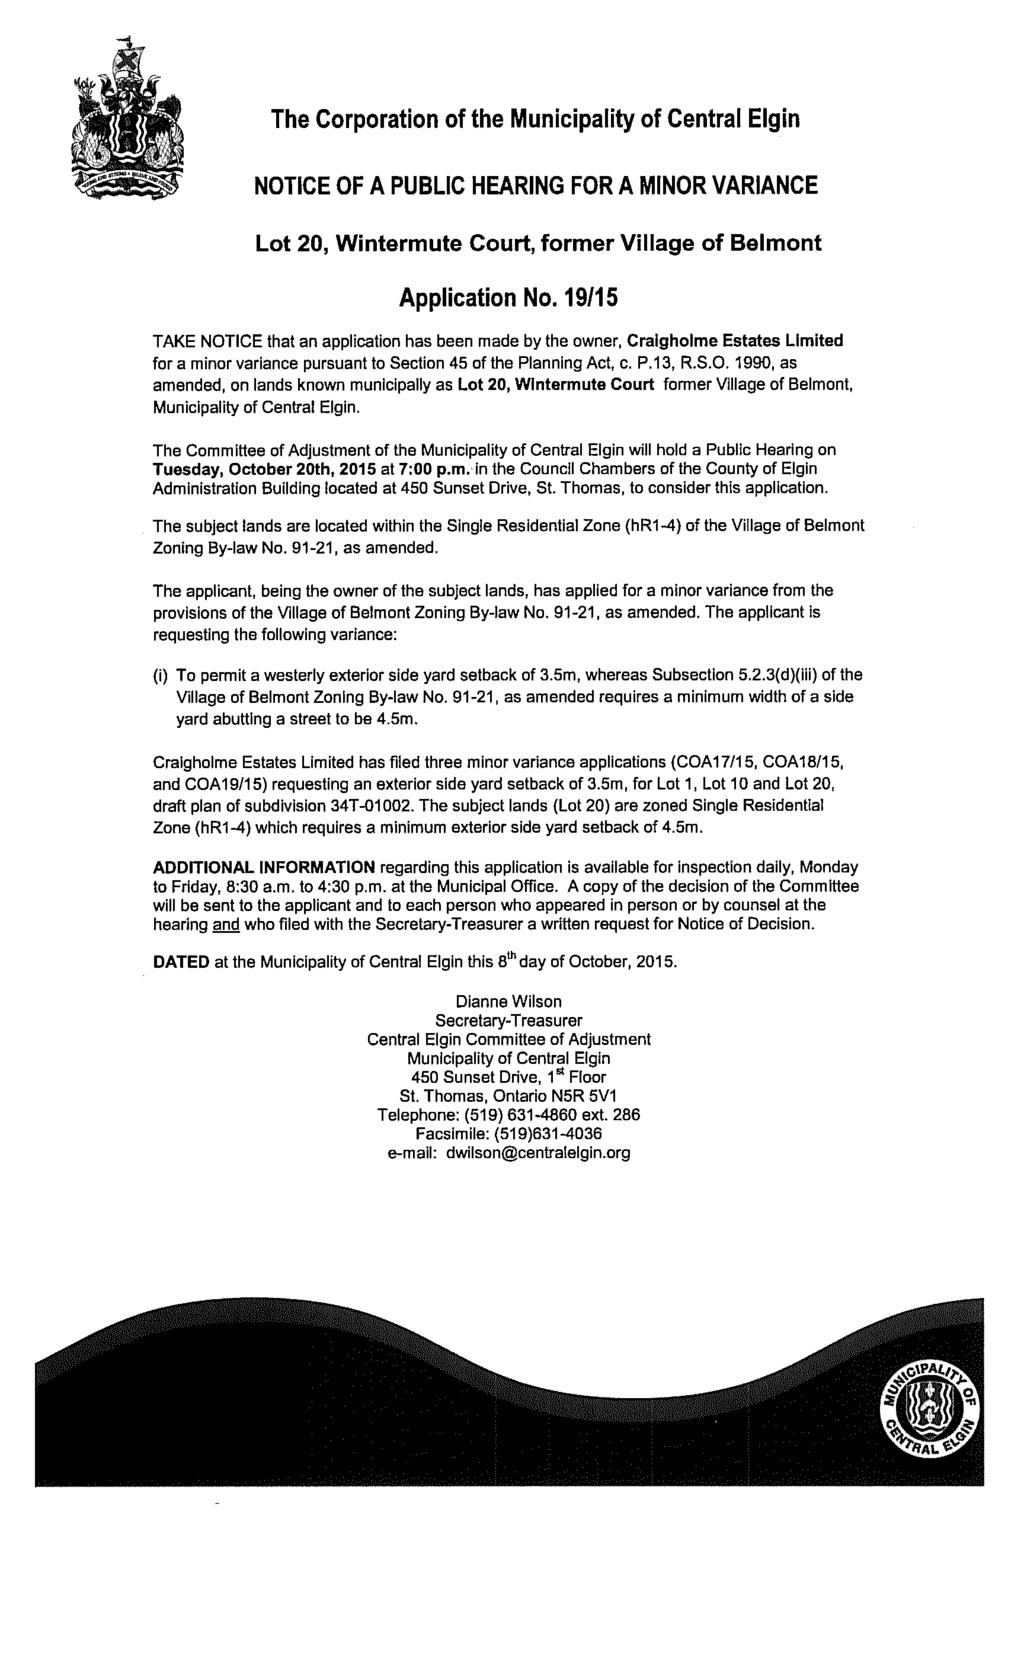 The Corporation of the Municipality of Central Elgin v NOTICE OF A PUBLIC HEARING FOR A MINOR VARIANCE Lot 20, Wintermute Court, former Village of Belmont Application No.